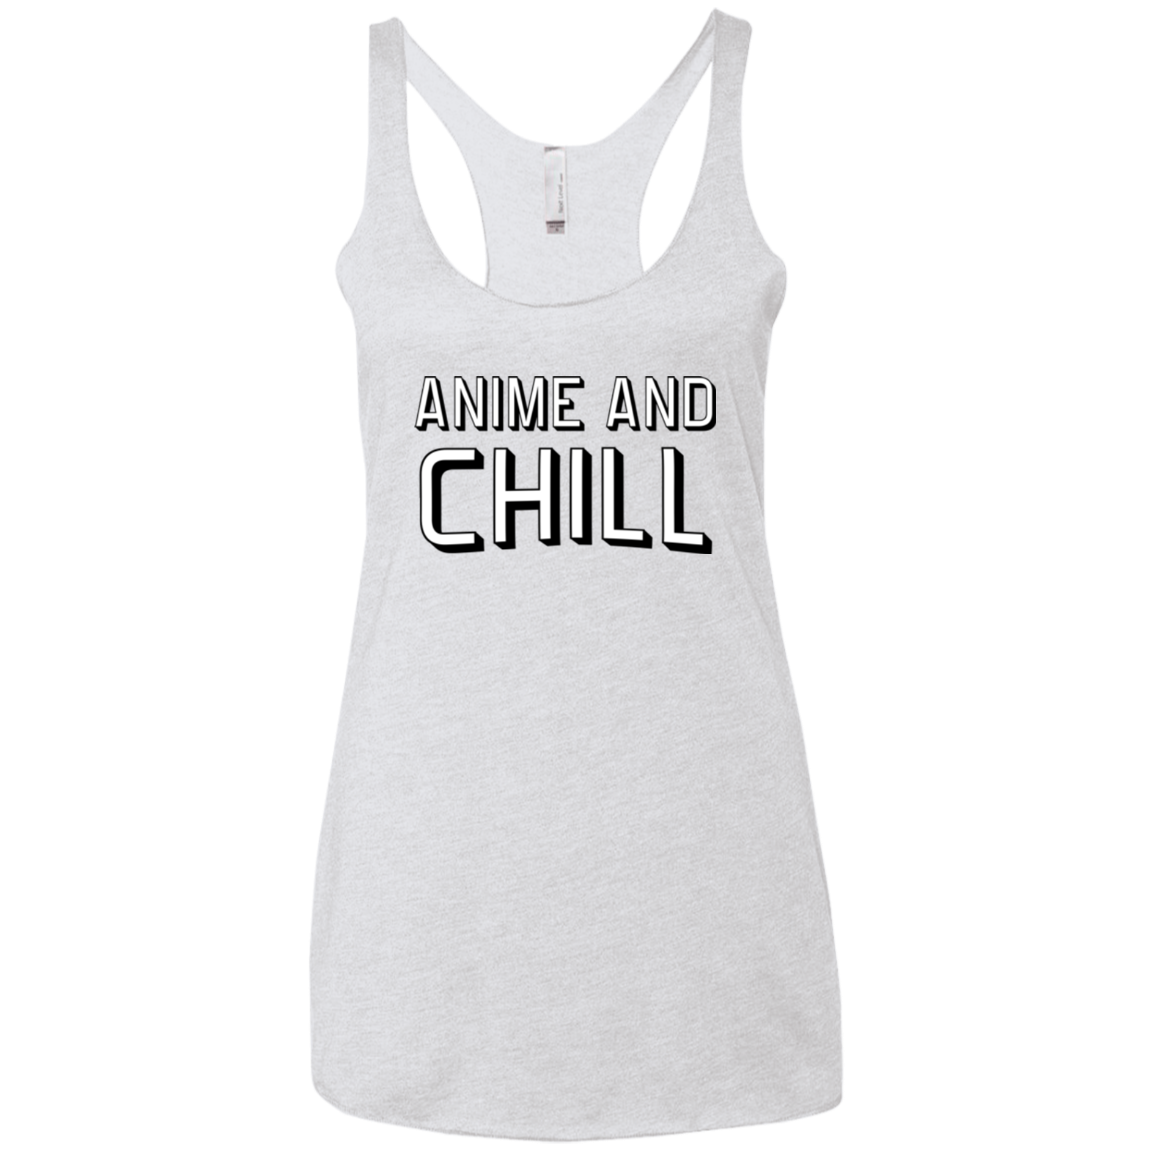 Anime and chill Women's Triblend Racerback Tank